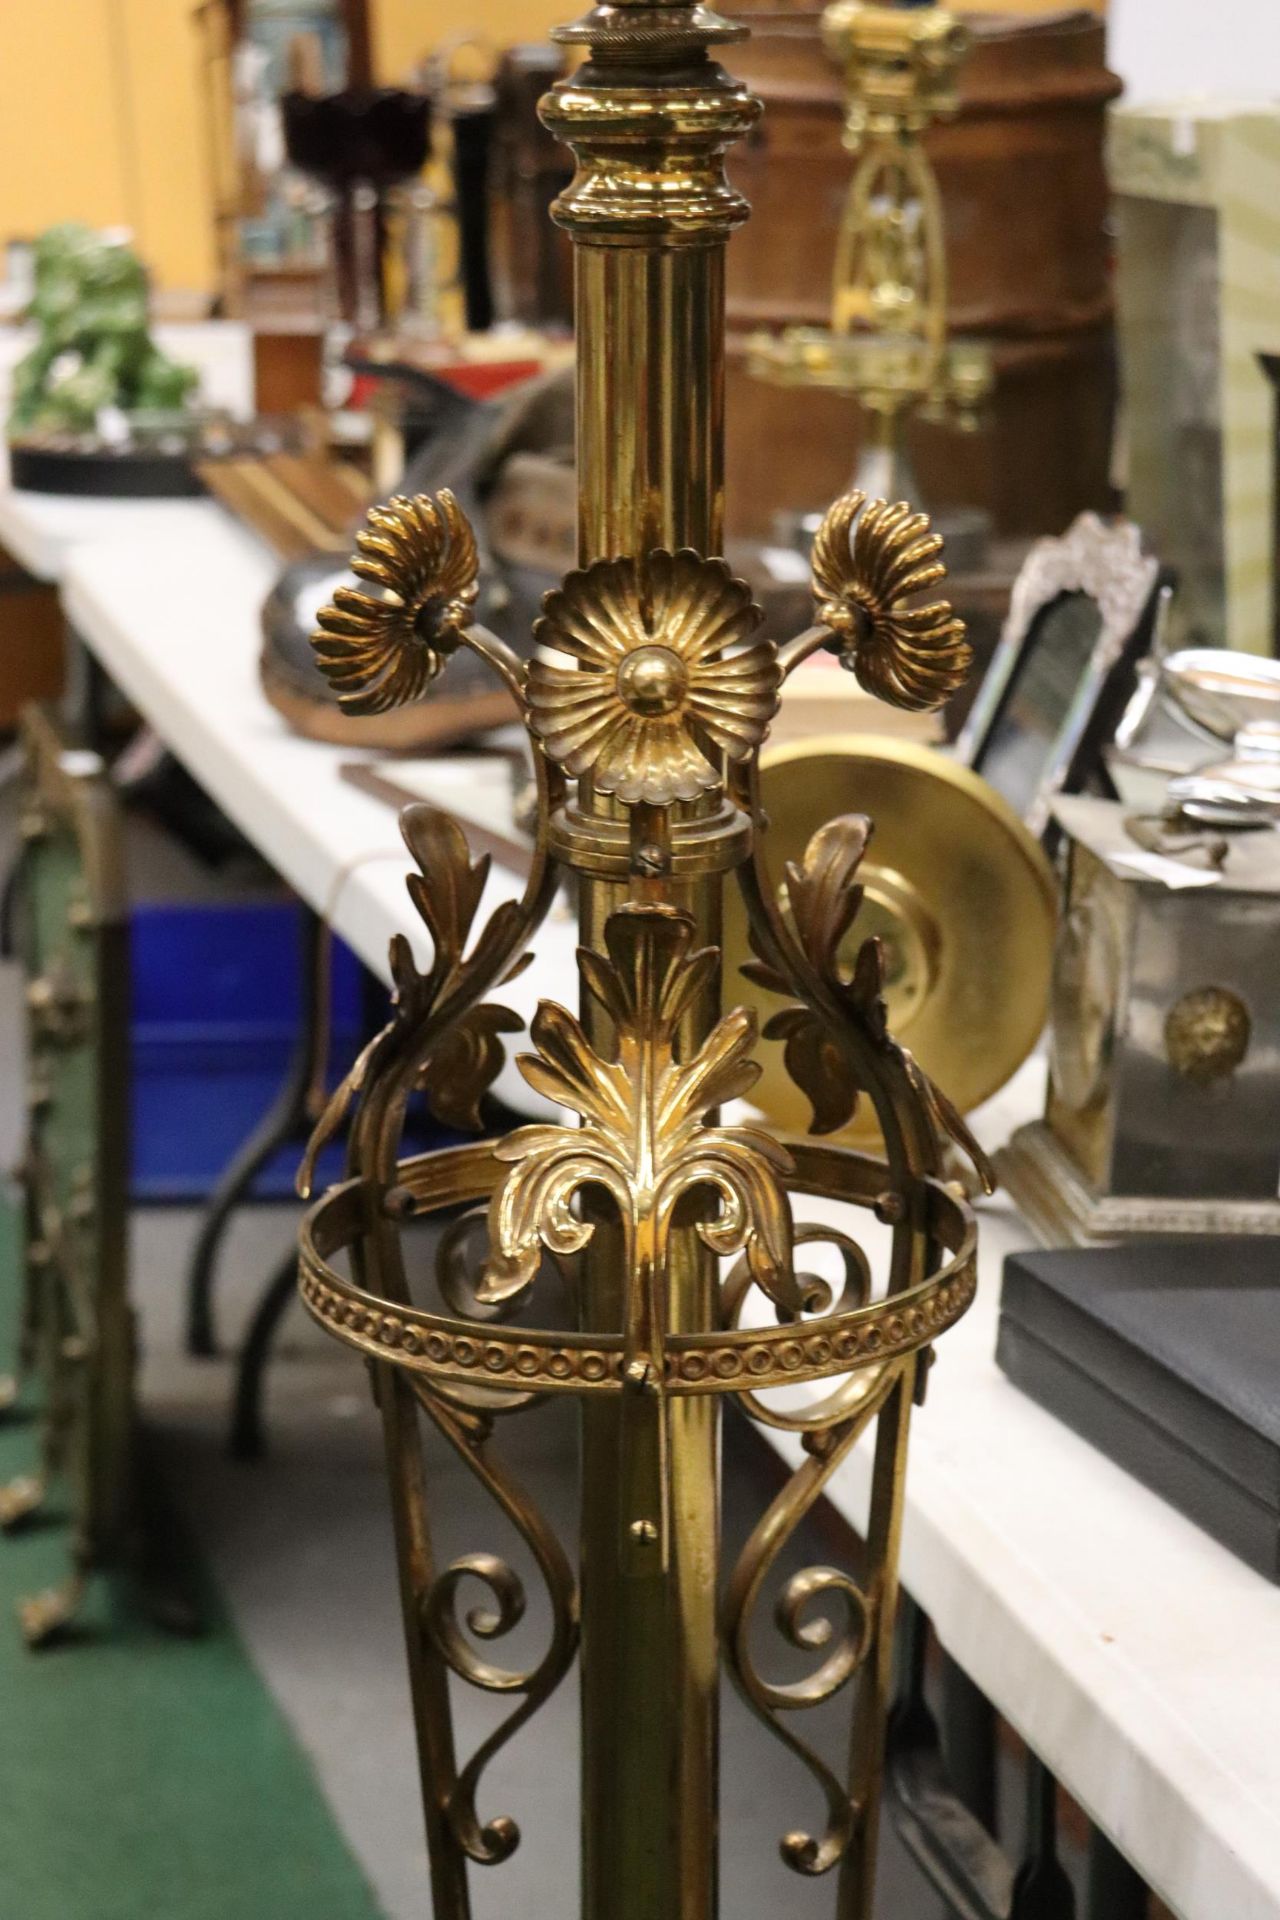 A FLOOR STANDING BRASS PUGIN STYLE CONVERTED CANDLESTICK WITH ORNAGE GLASS SHADE - Image 3 of 8